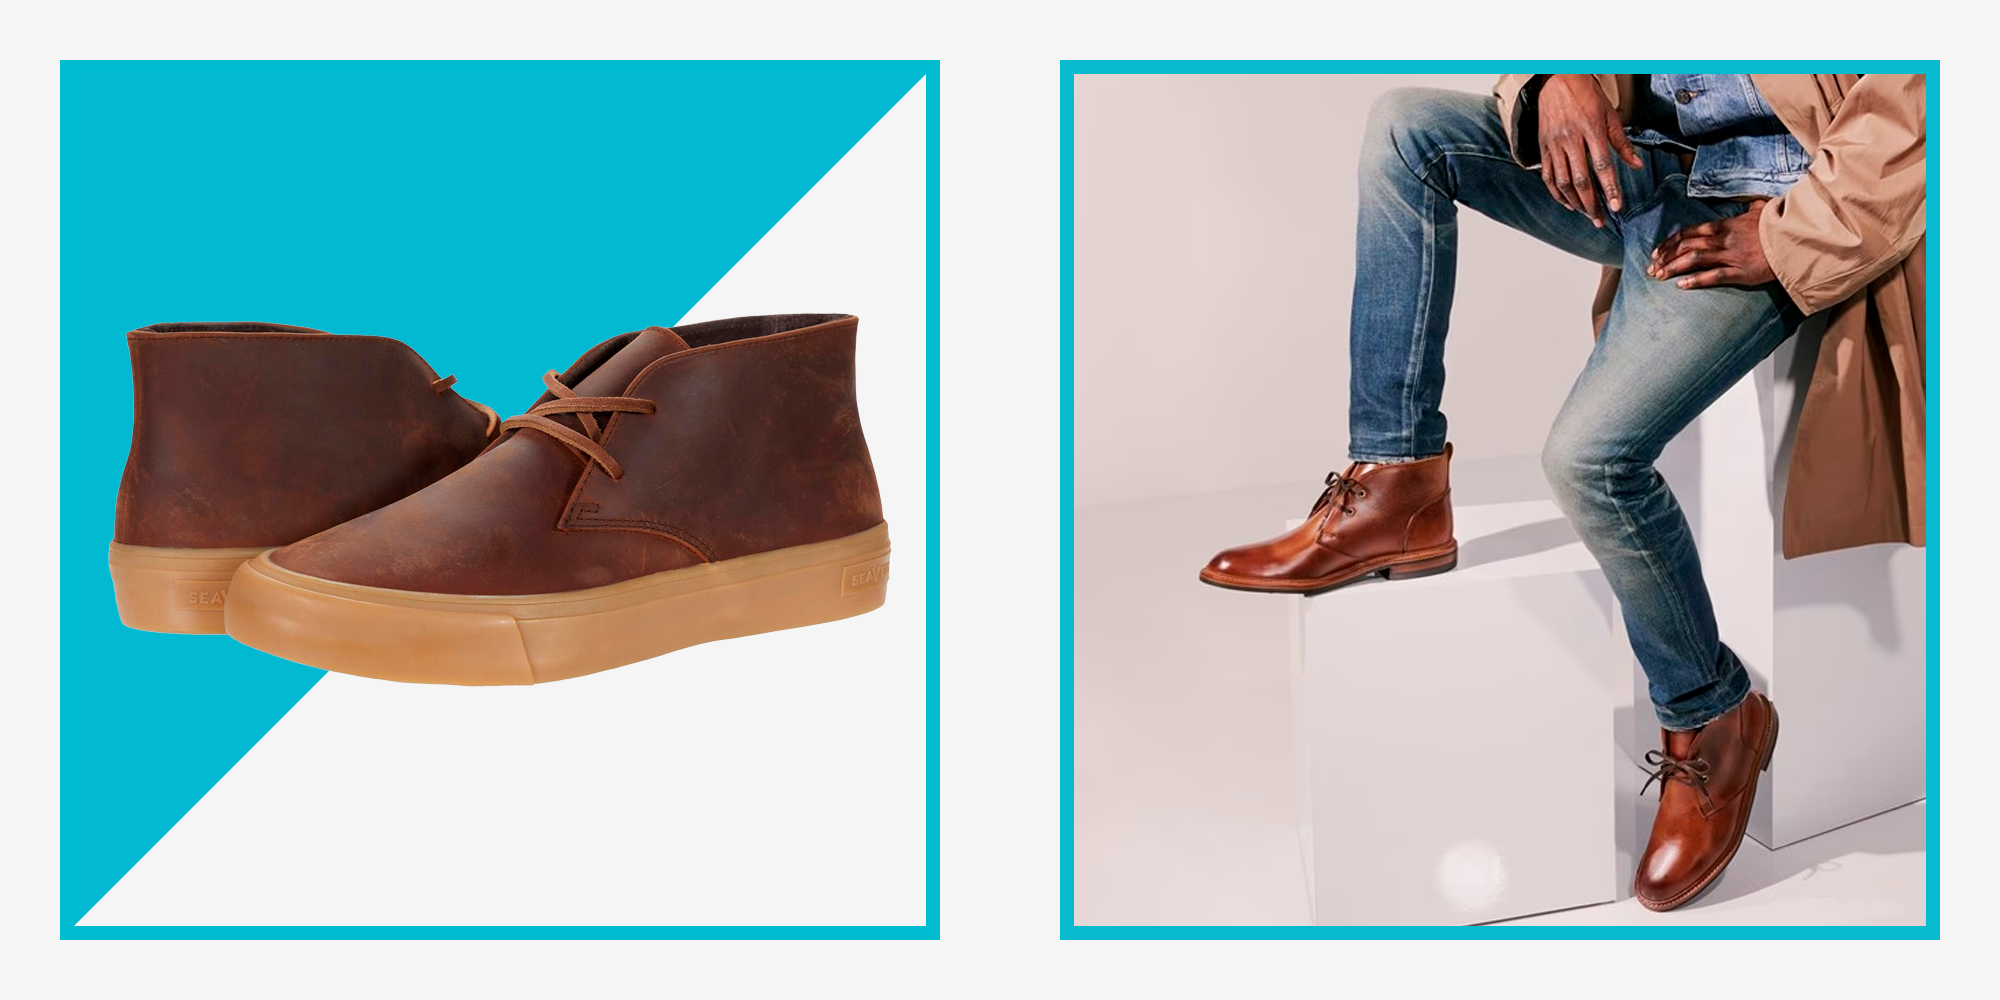 10 Desert Boots That Are Tough, Comfy, and Stylish